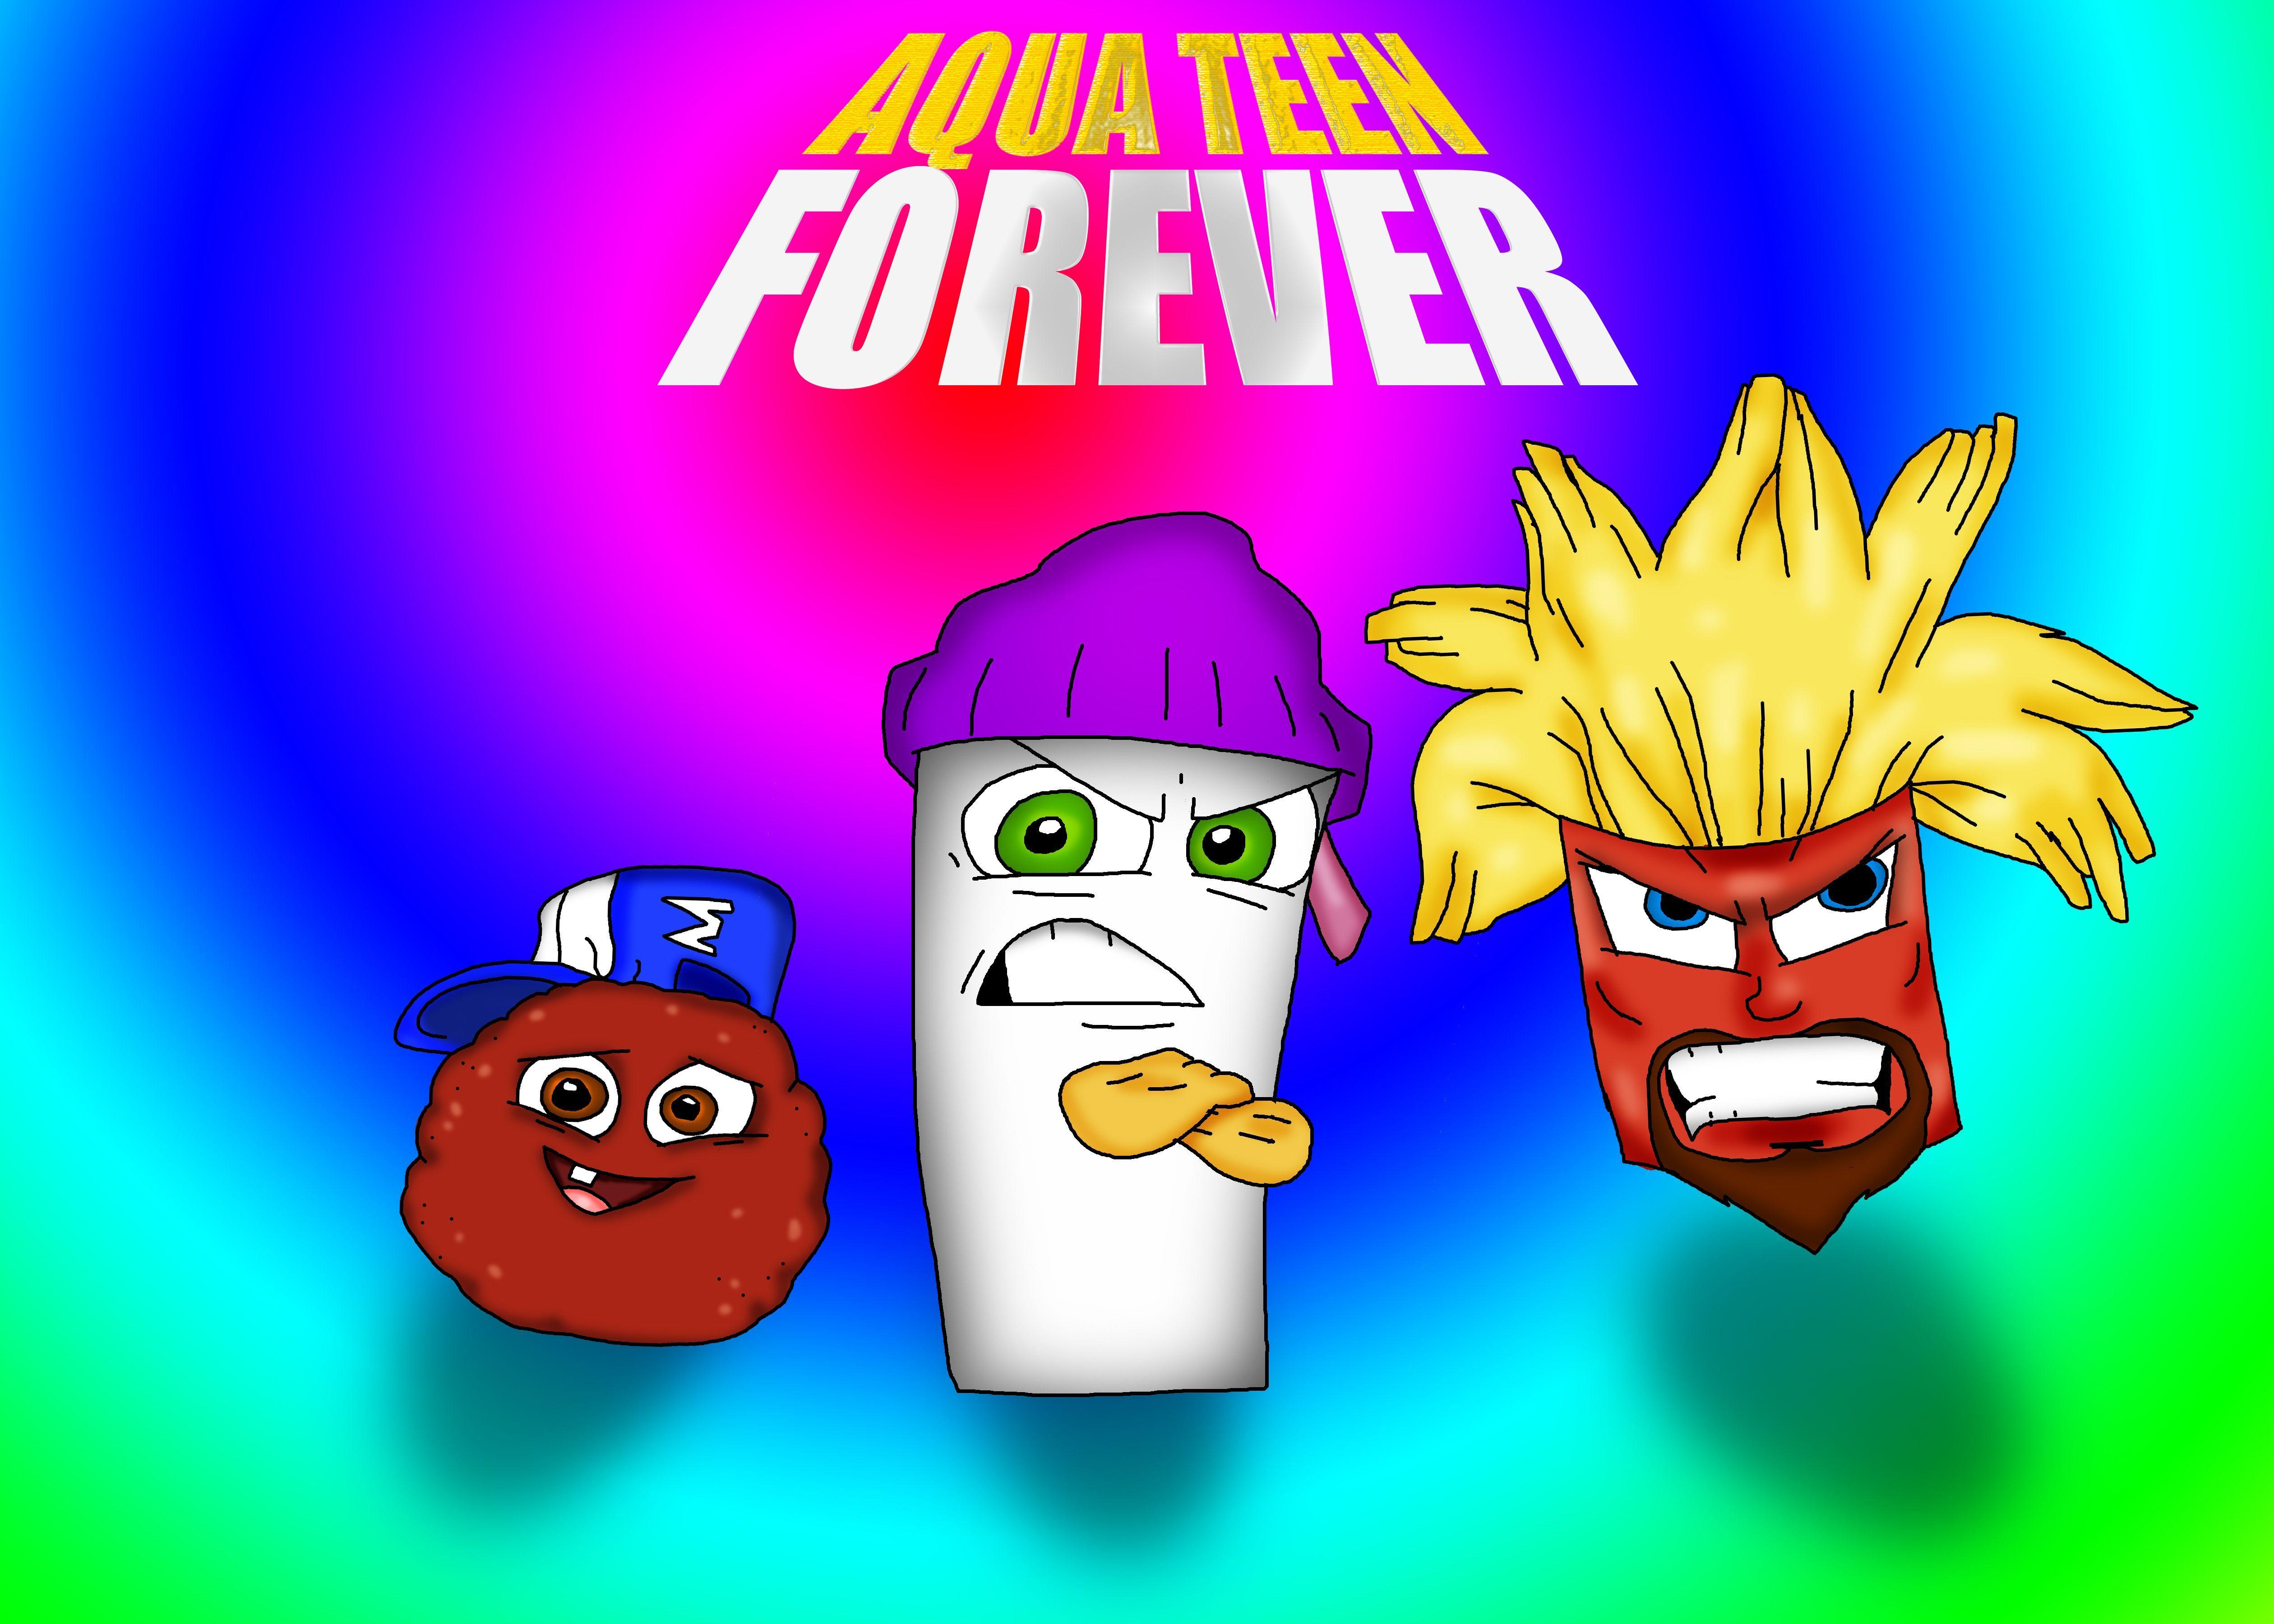 Best Movies and TV shows Like Aqua Teen Hunger Force  BestSimilar